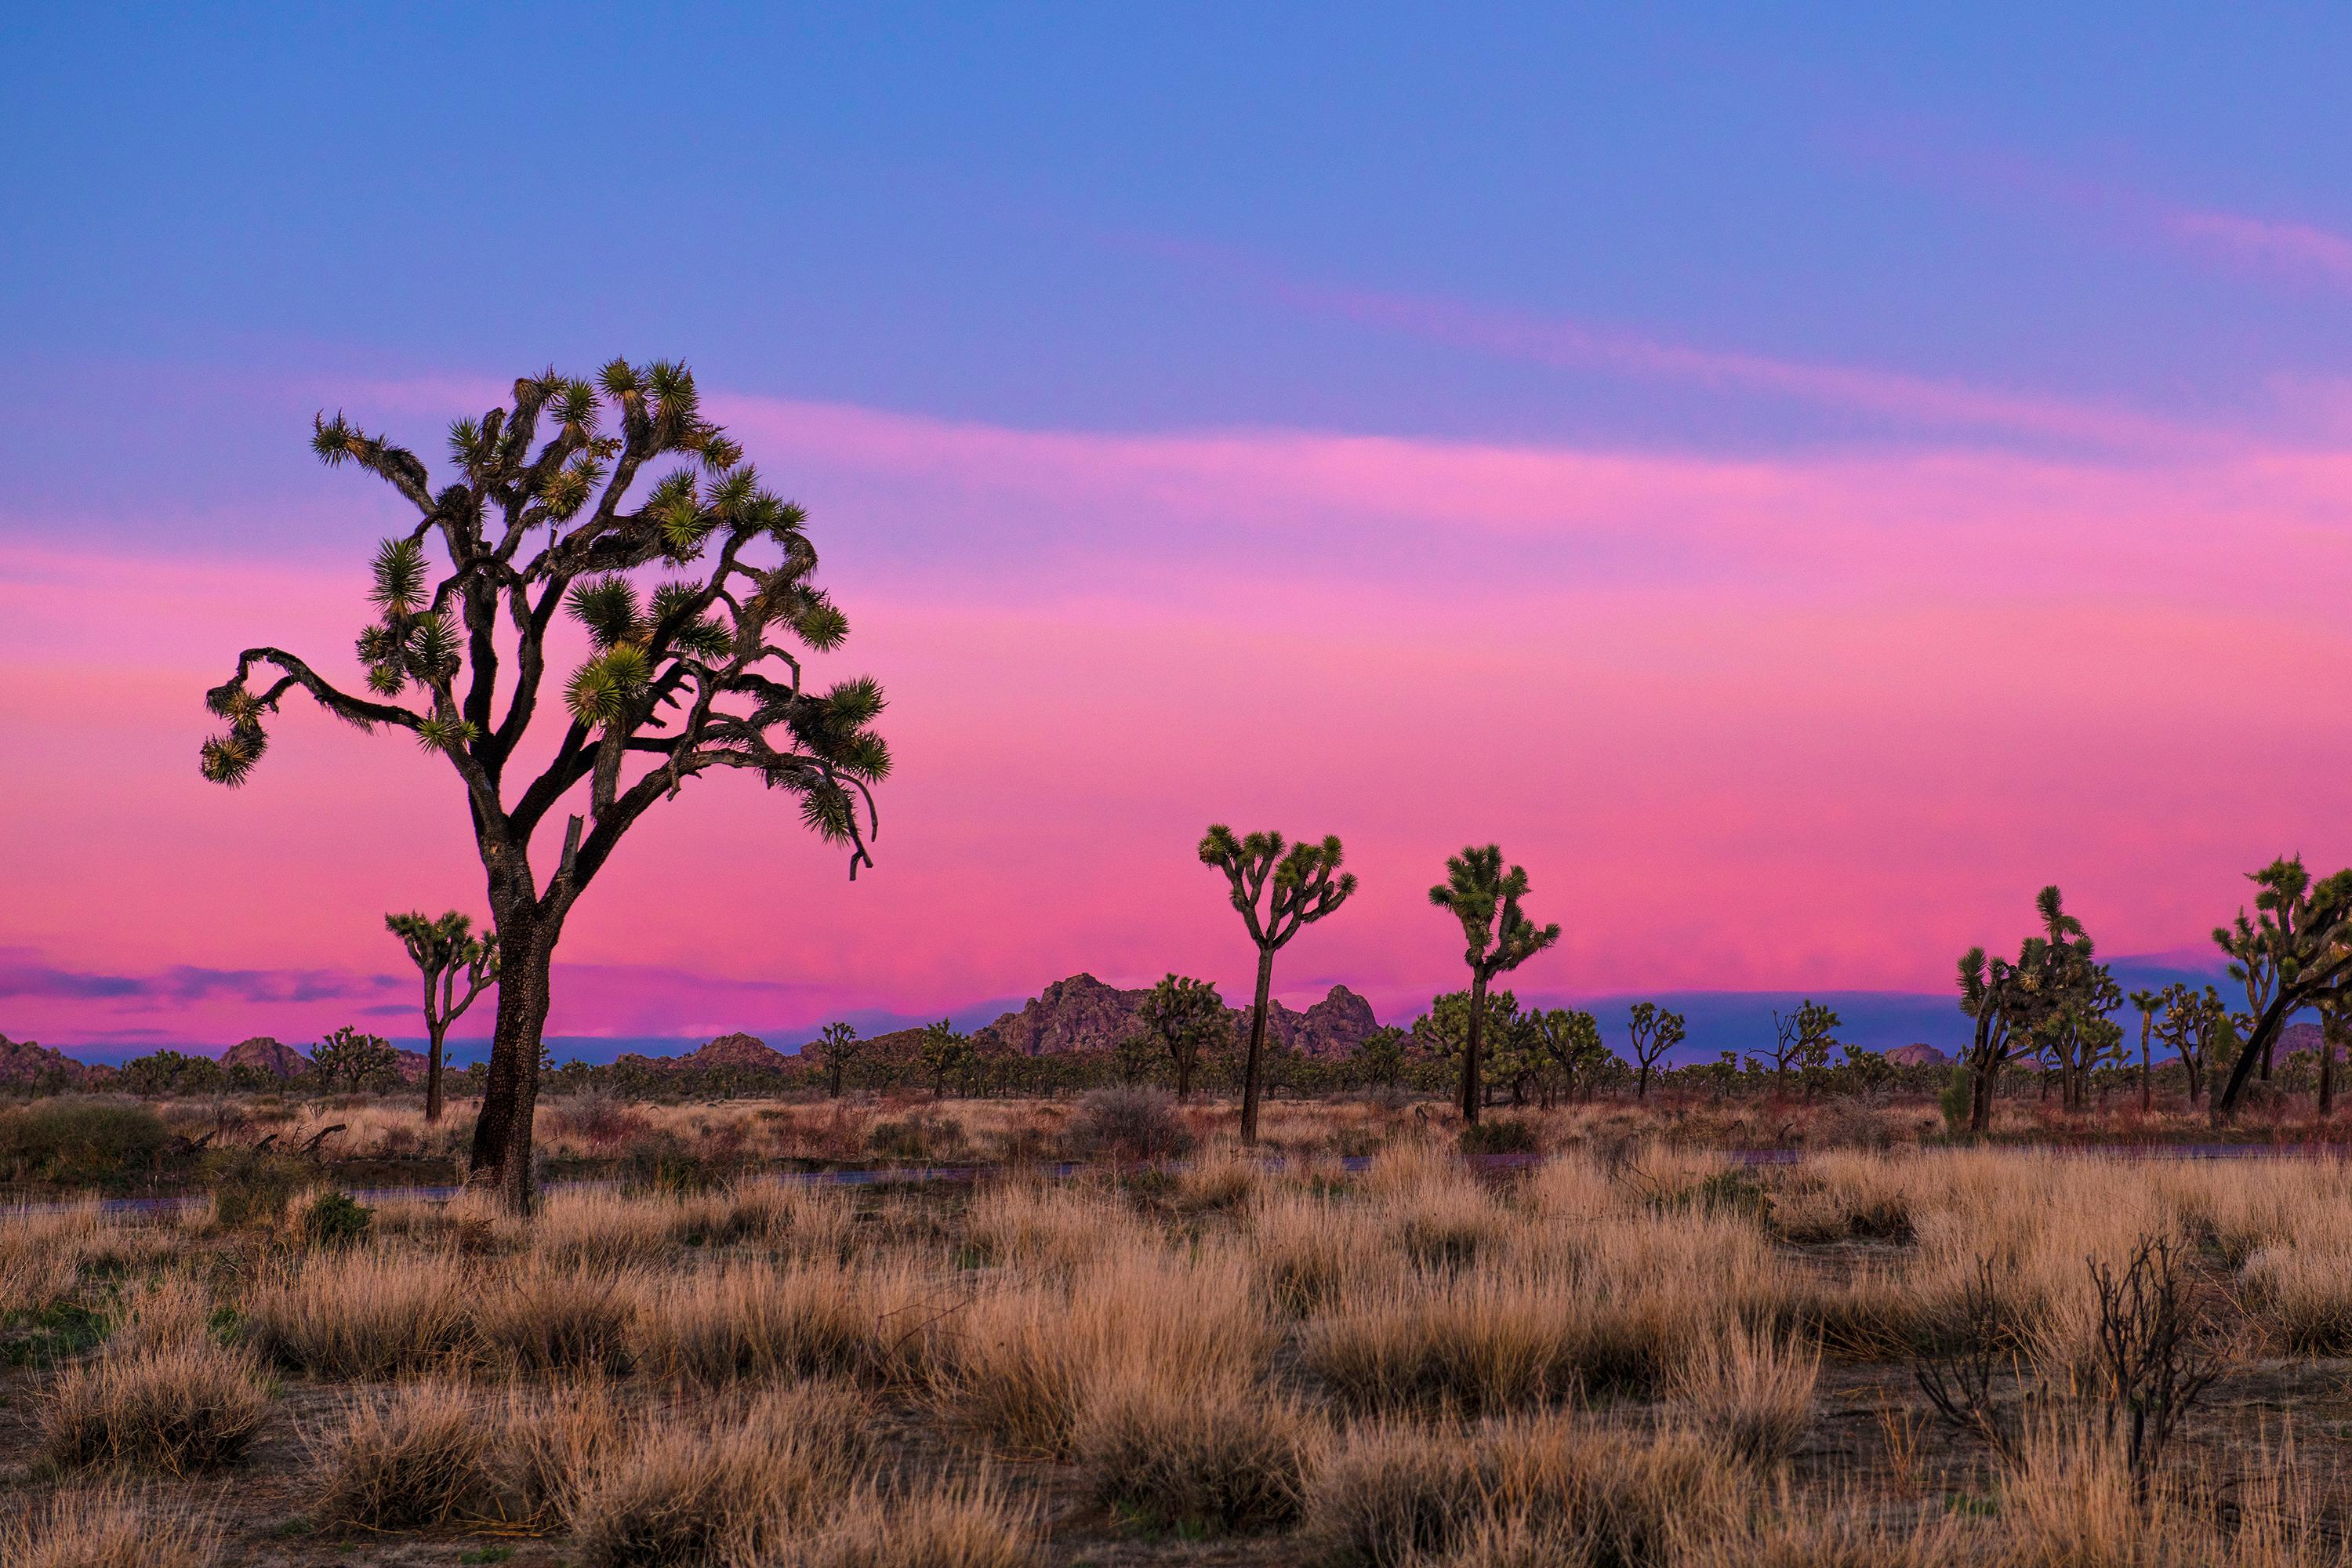 The sky turns hues of pink and purple over a field of Joshua trees.